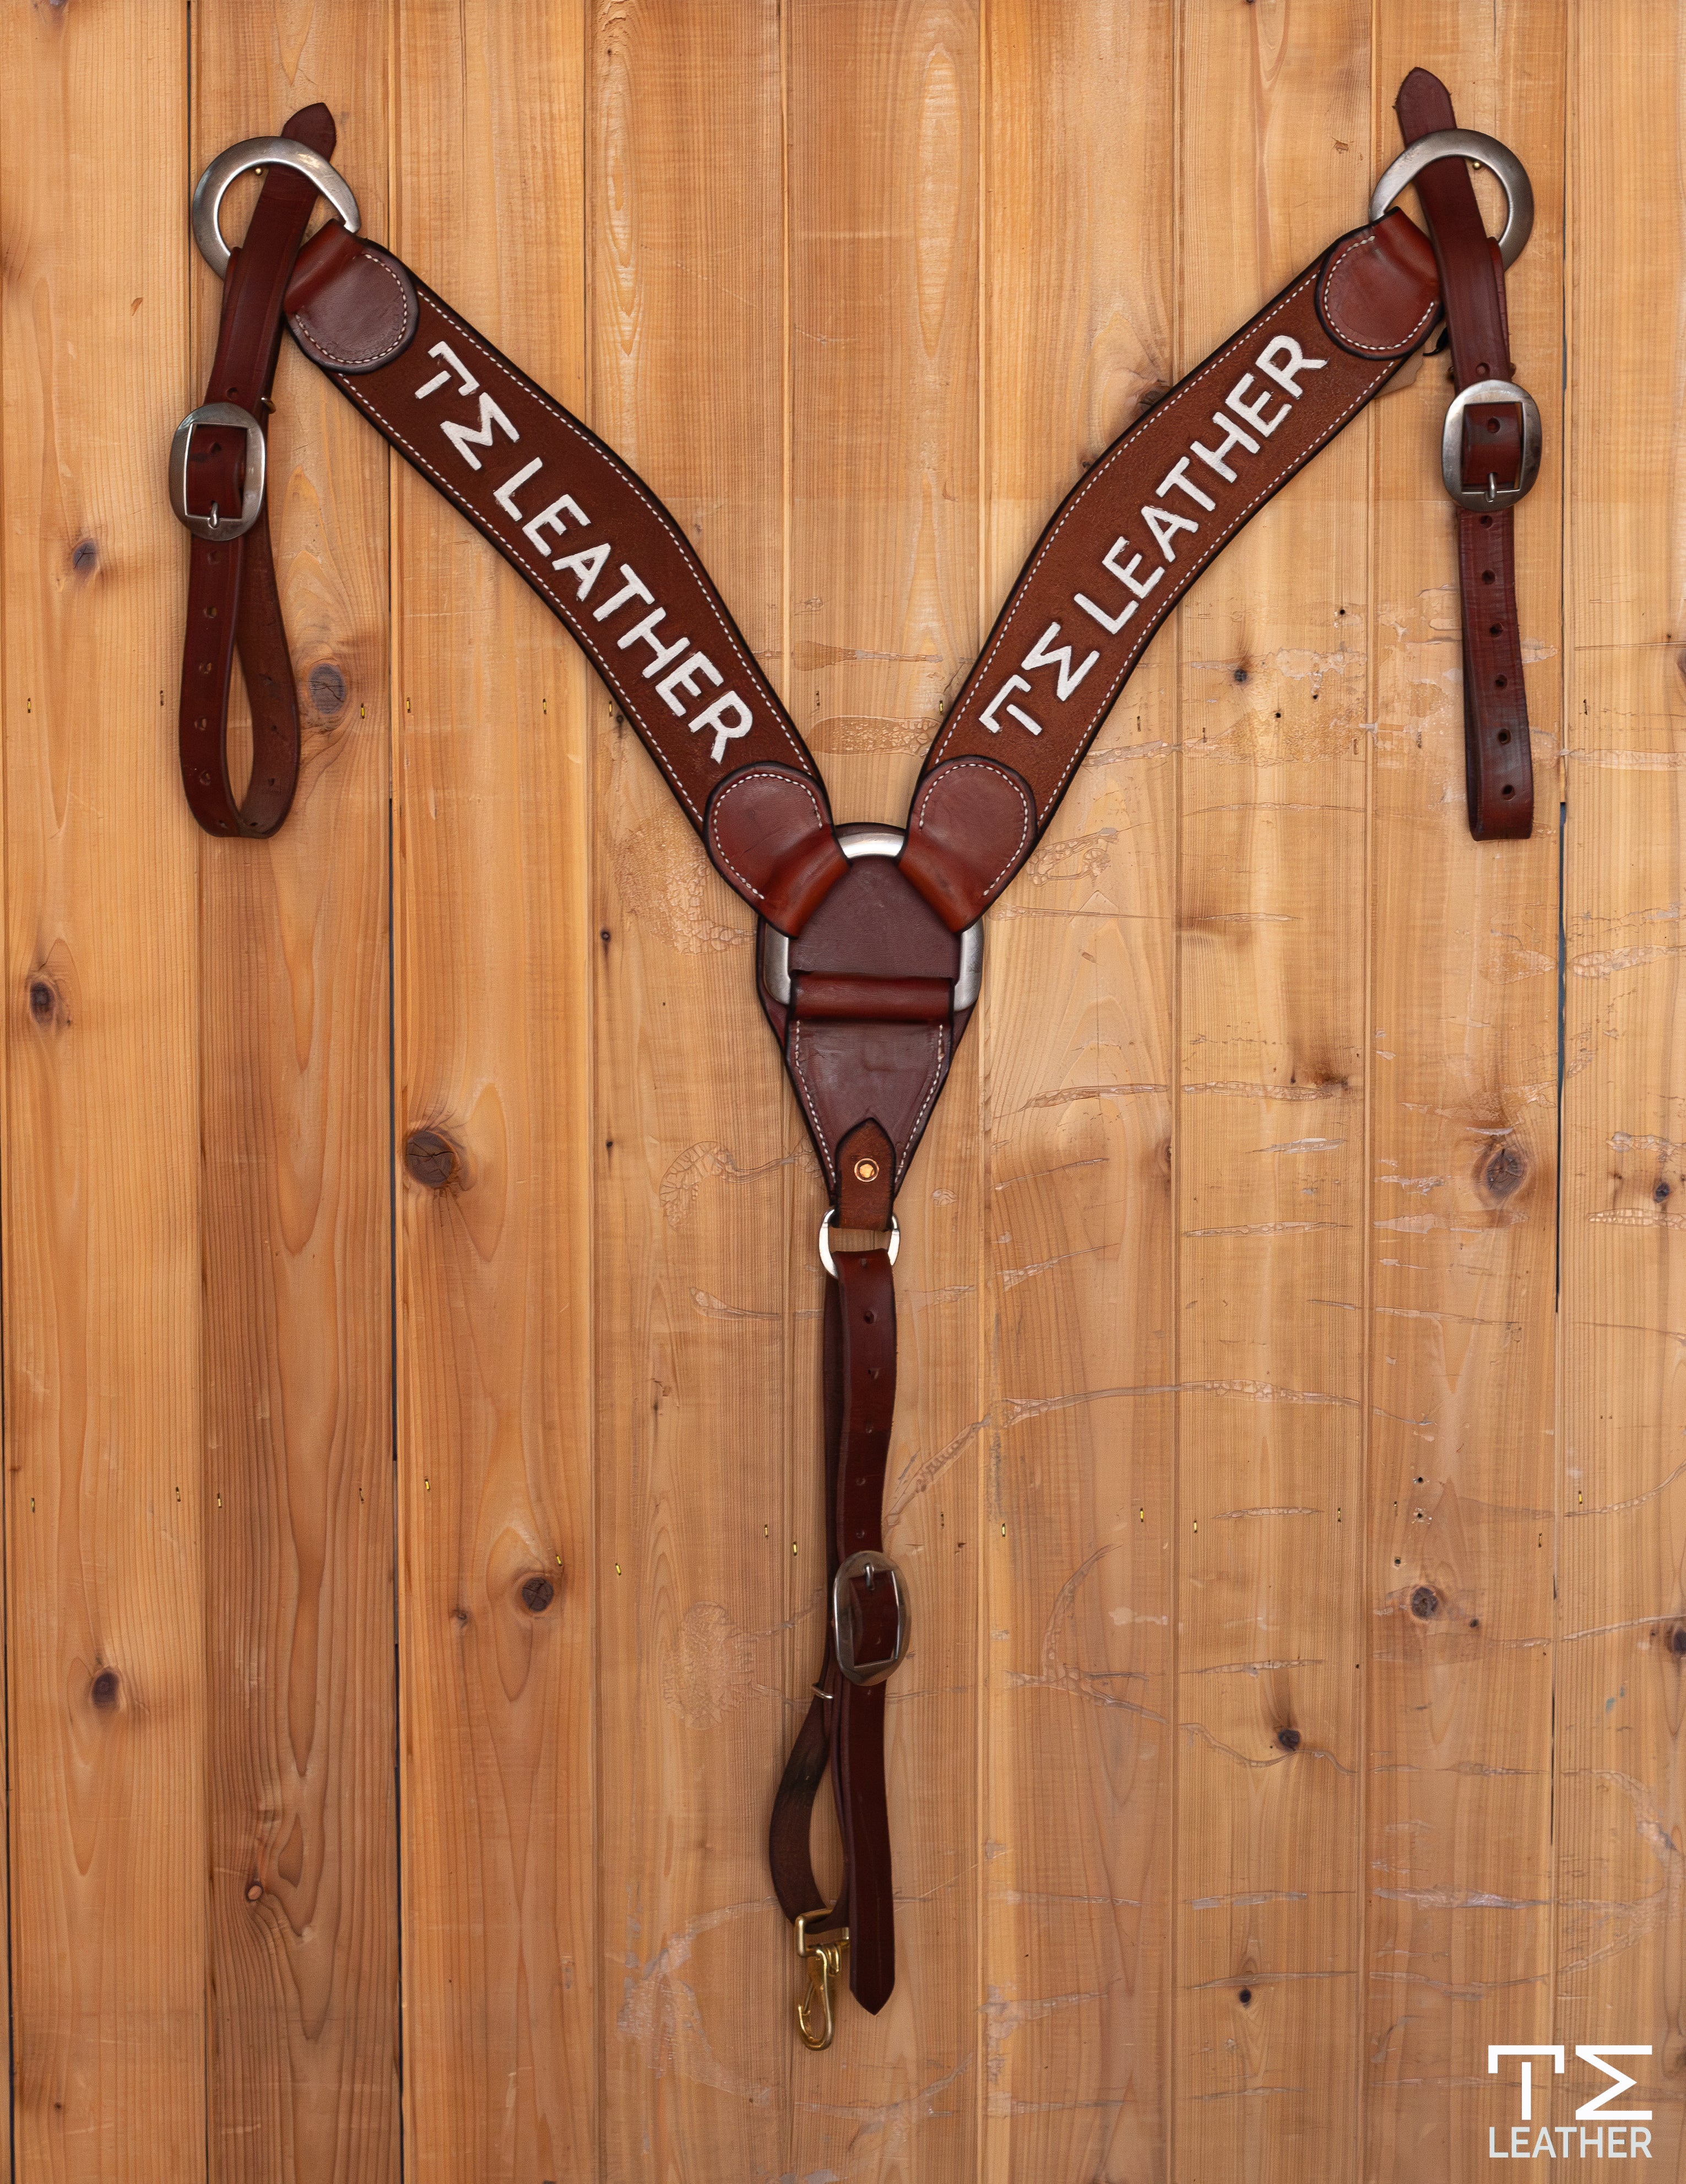 2.5" TM LEATHER Natural Roughout Three Piece Roper Breast Collar w/ White Lettering